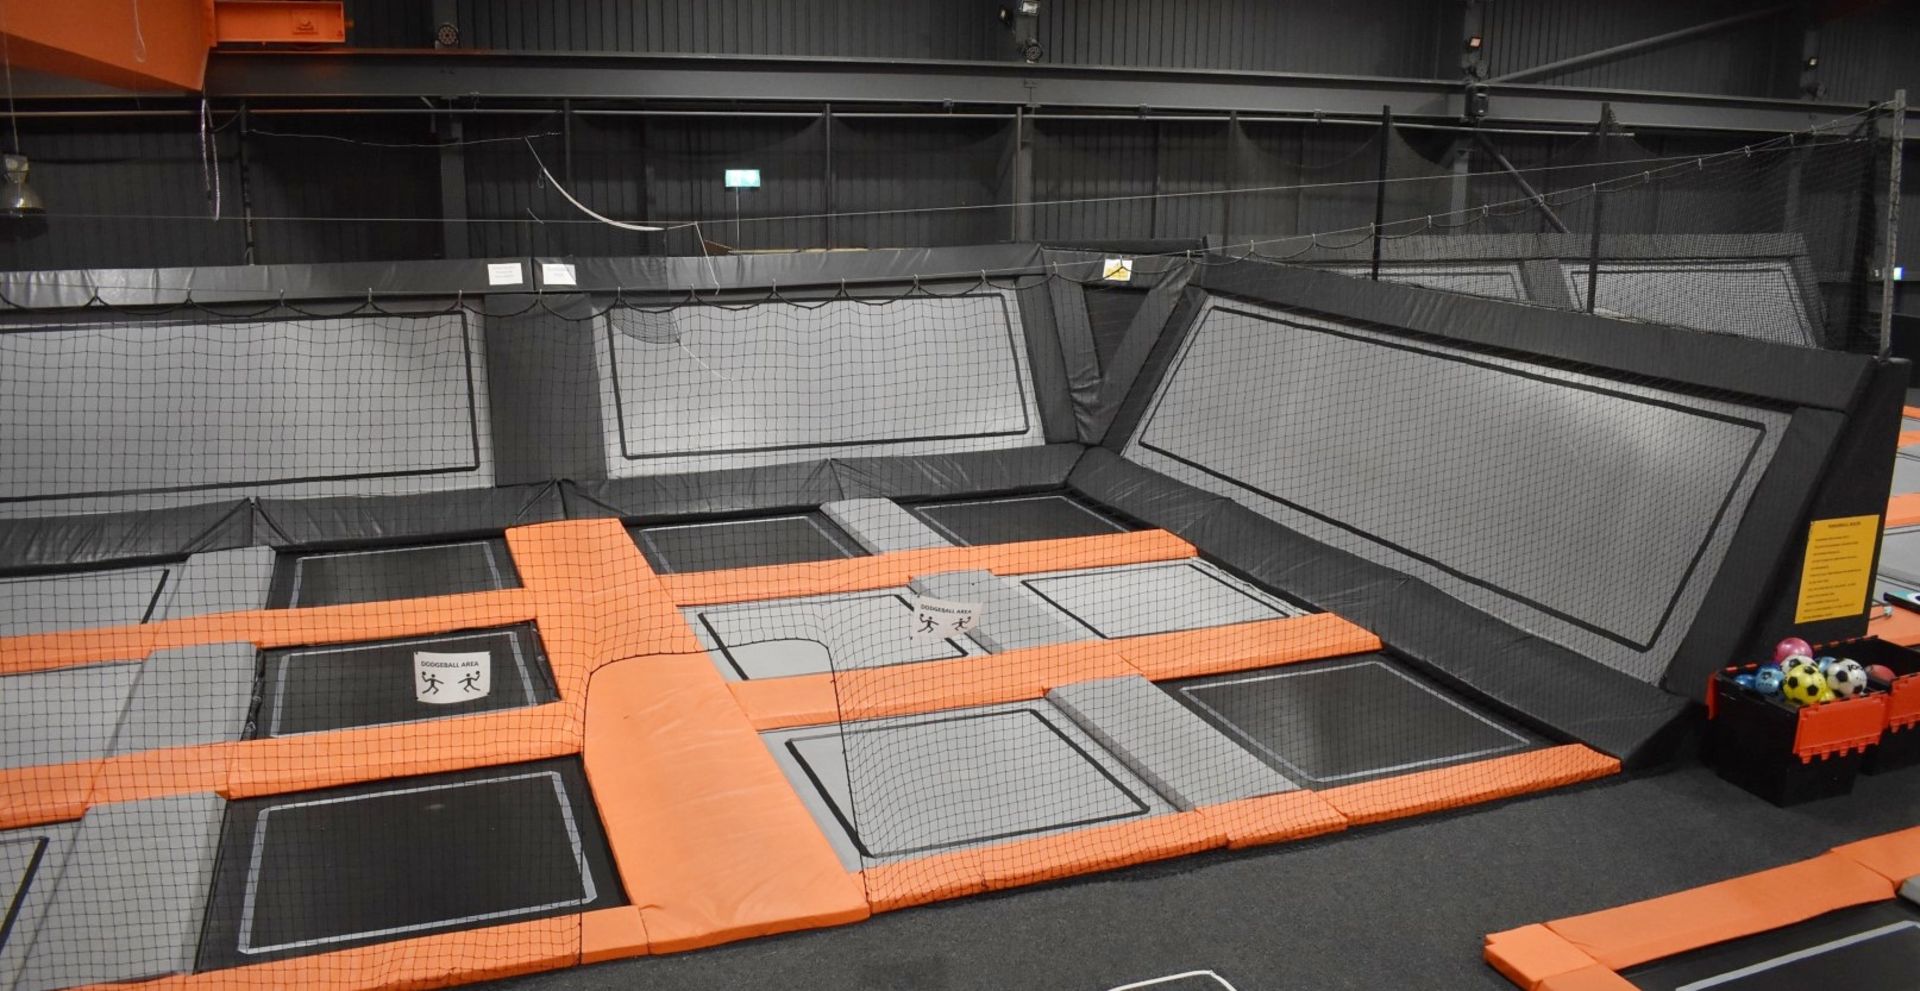 1 x Large Trampoline Park - Disassembled - Includes Dodgeball Arena And Jump Tower - CL766  - - Image 89 of 99